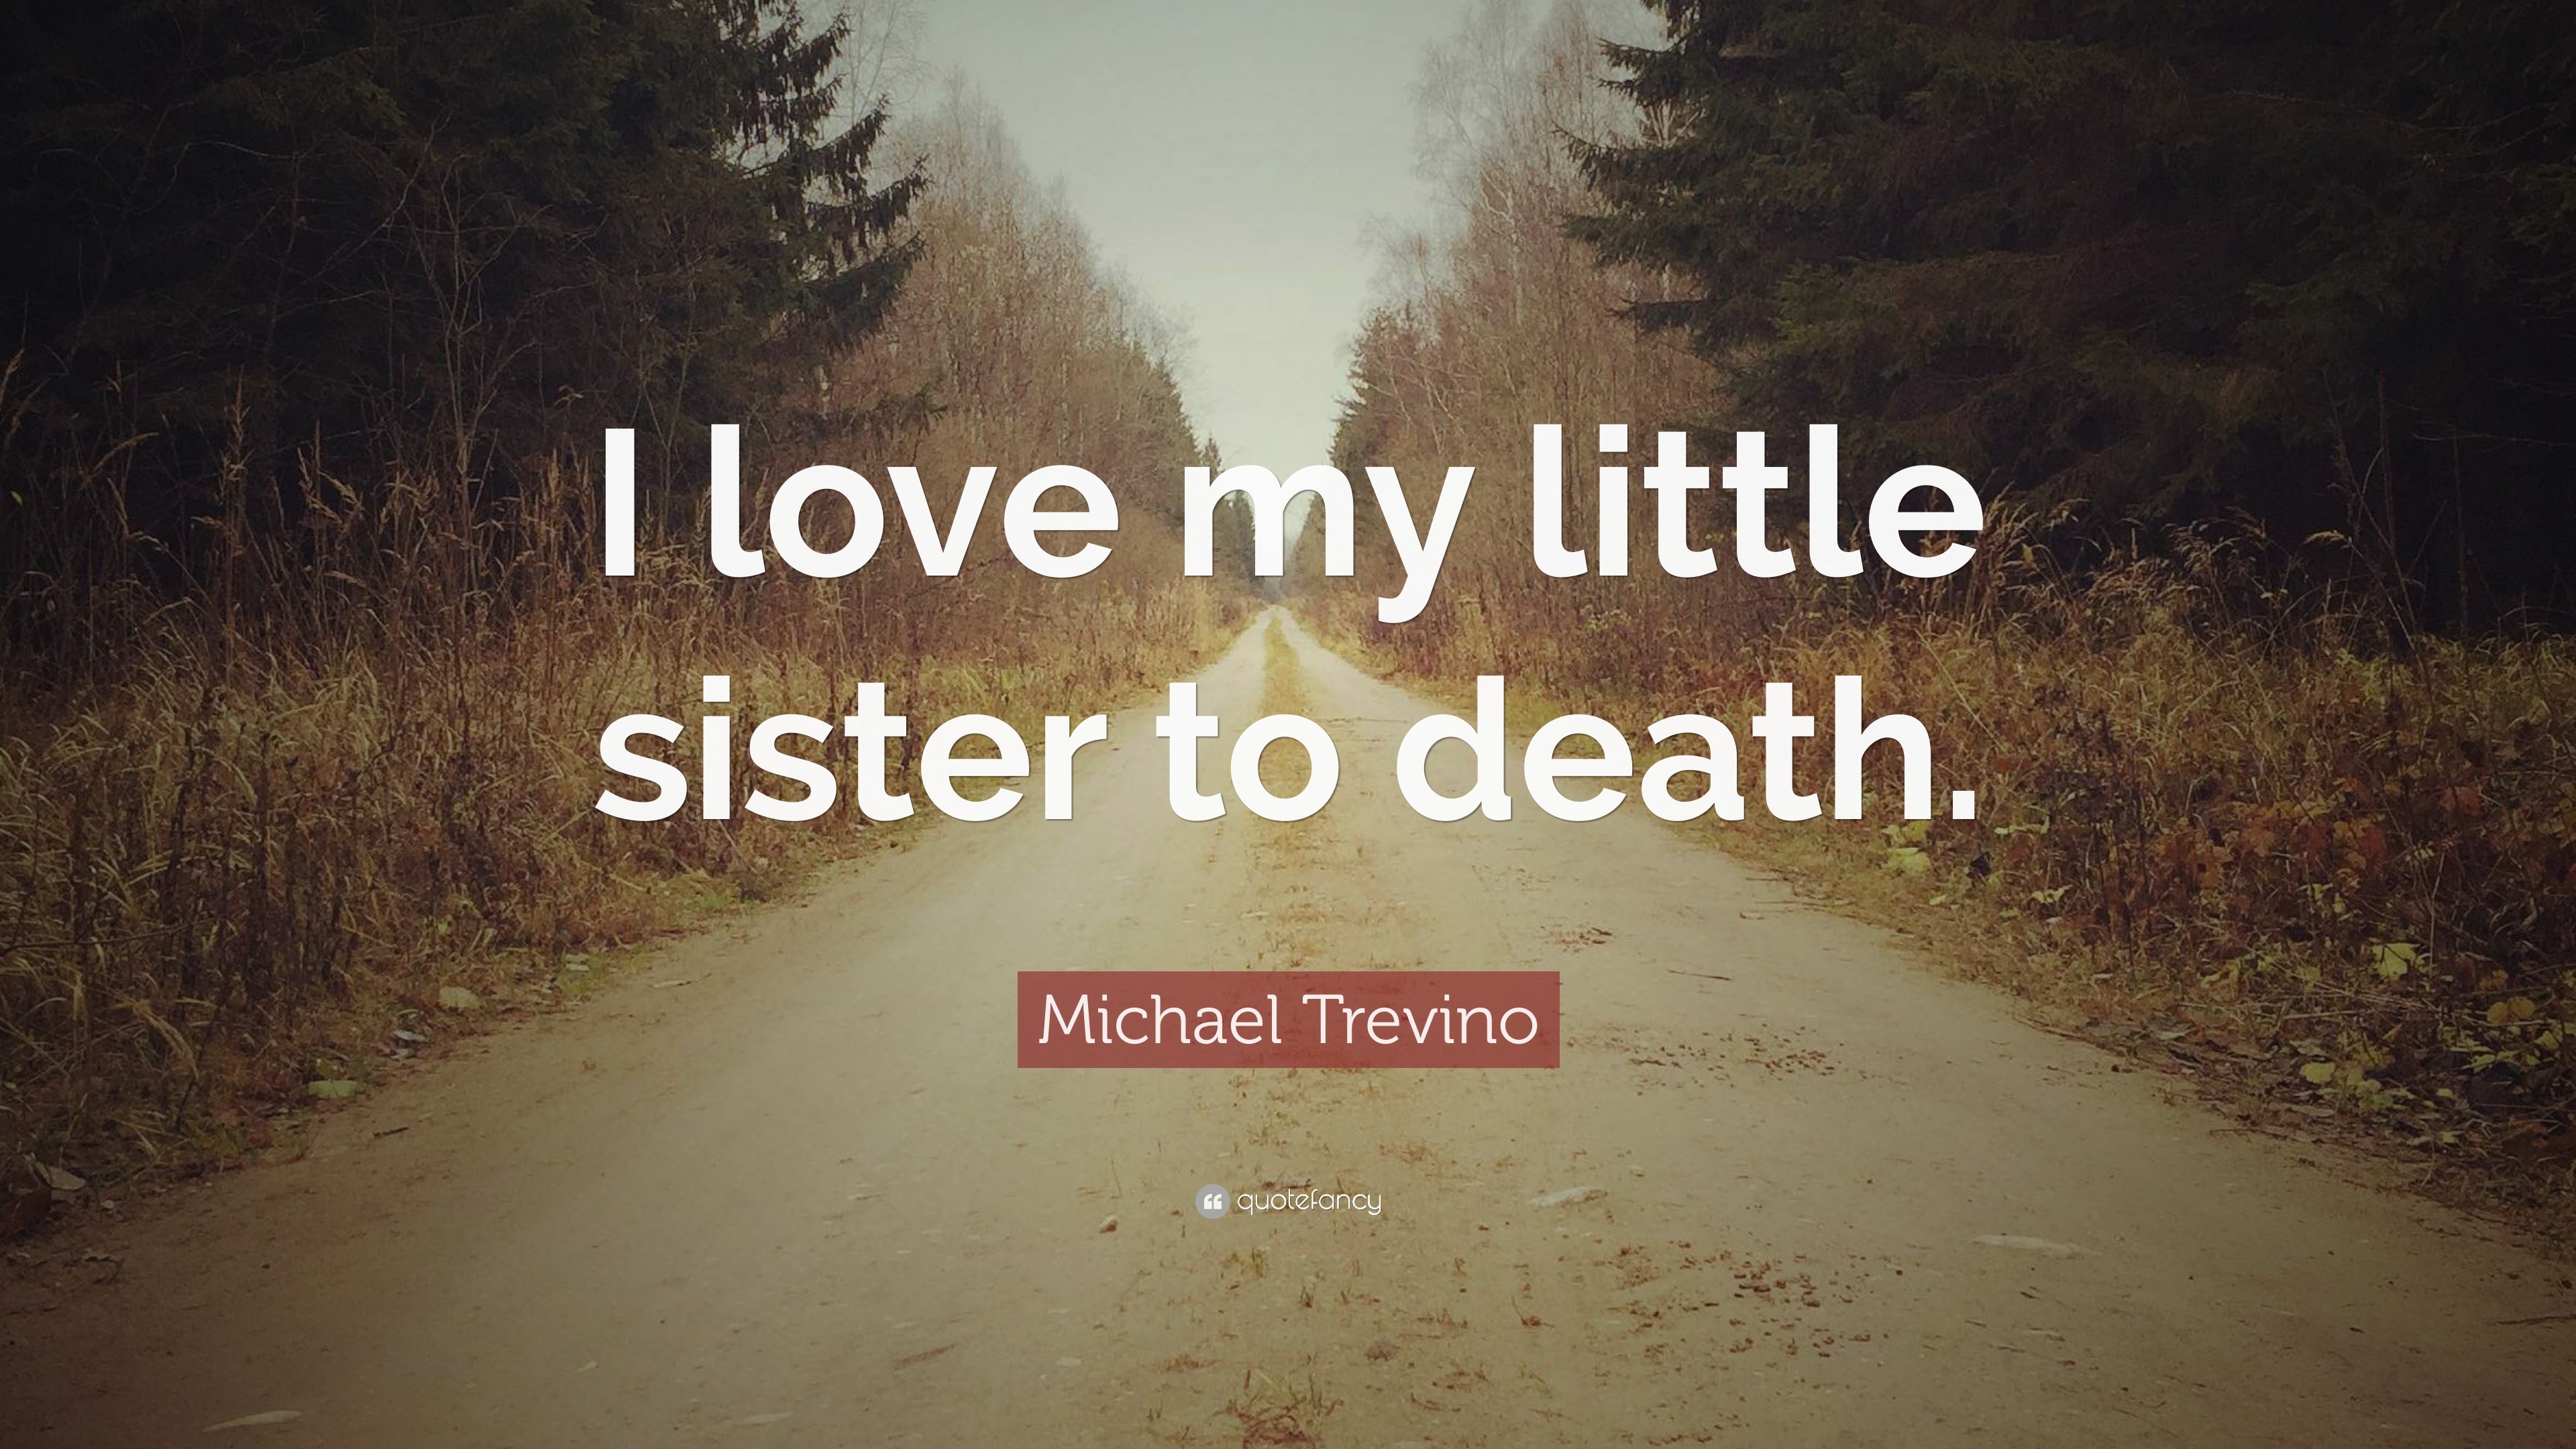 3840x2160 Michael Trevino Quote: “I love my little sister to death.”